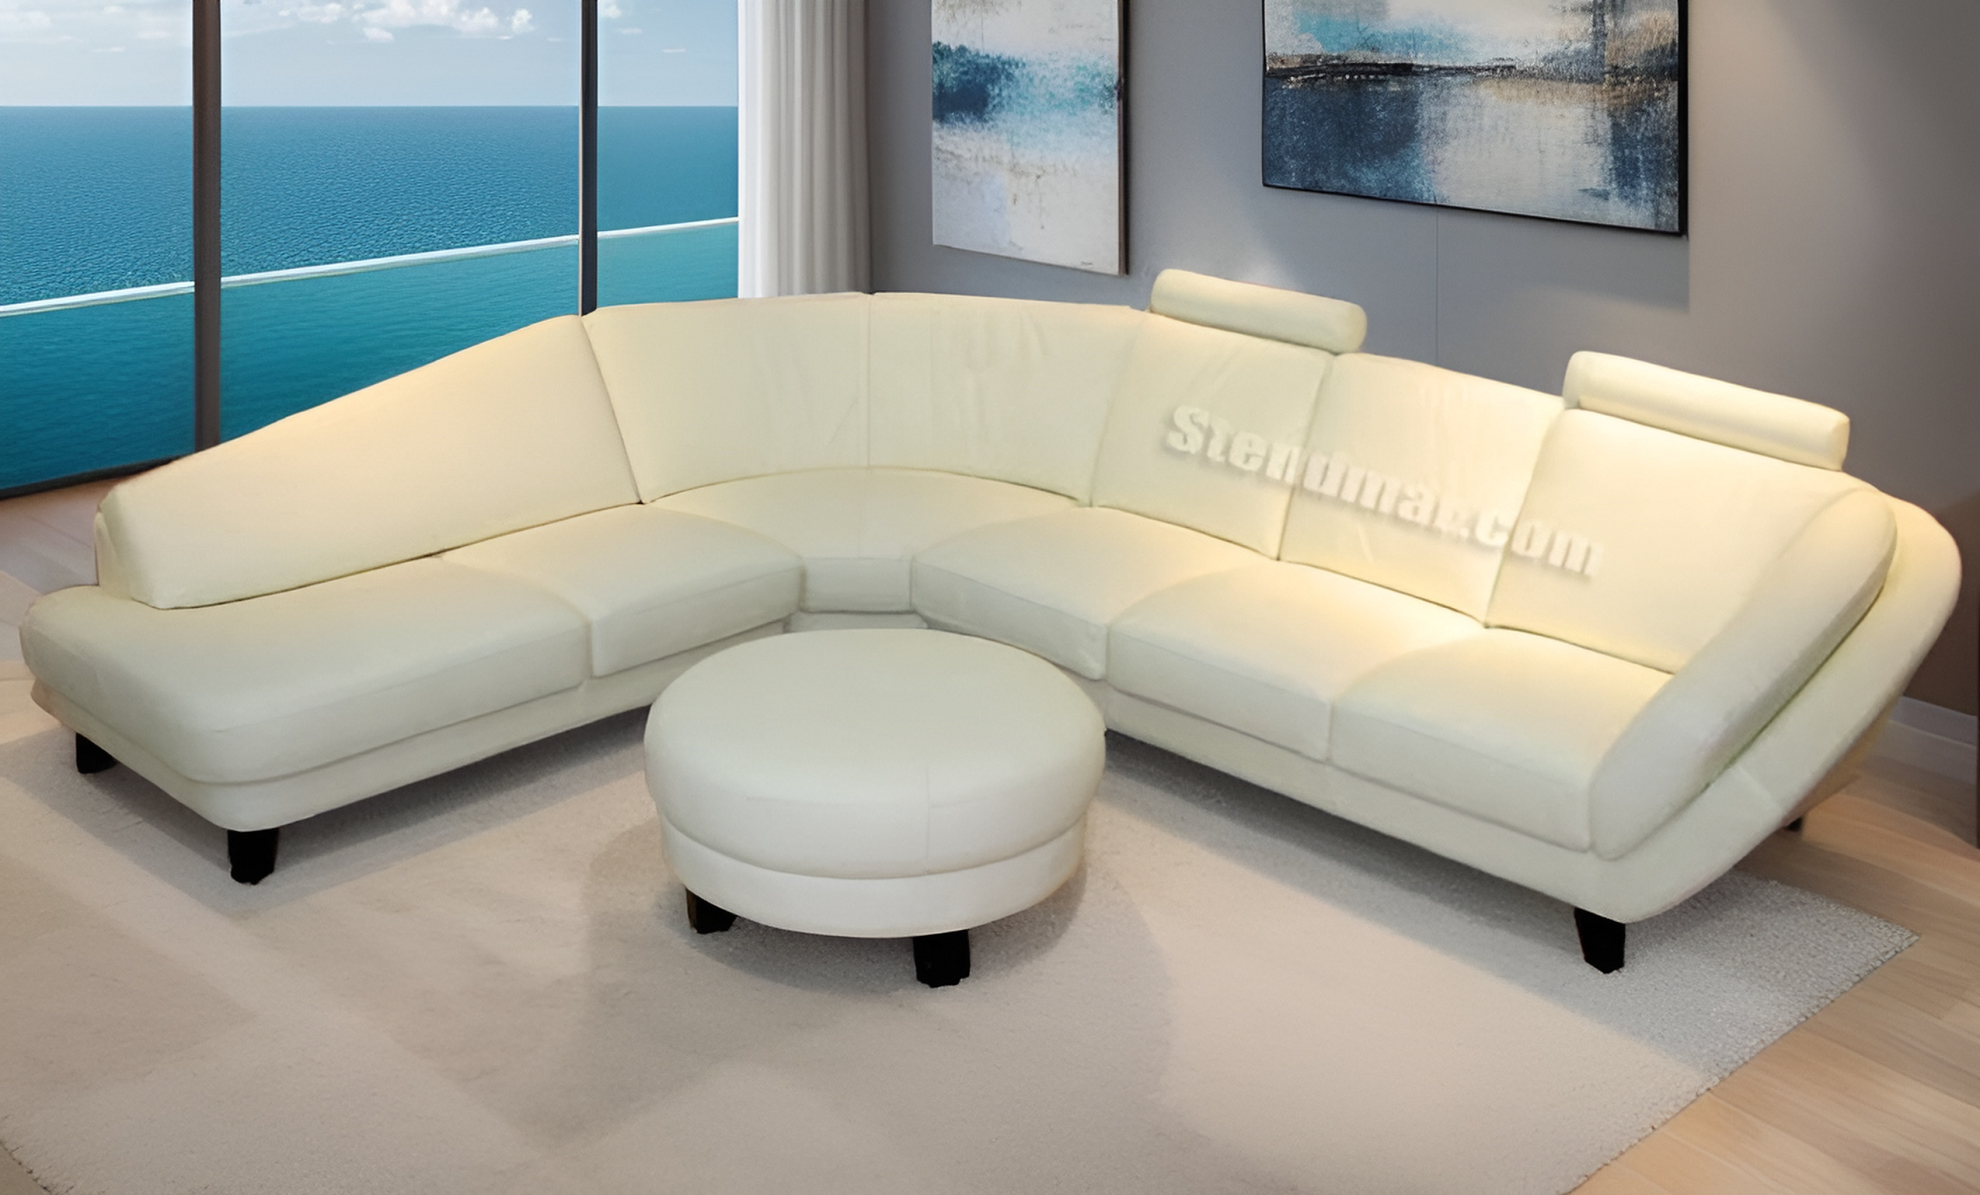 S685 4pc Sectional Leather Sofa Set